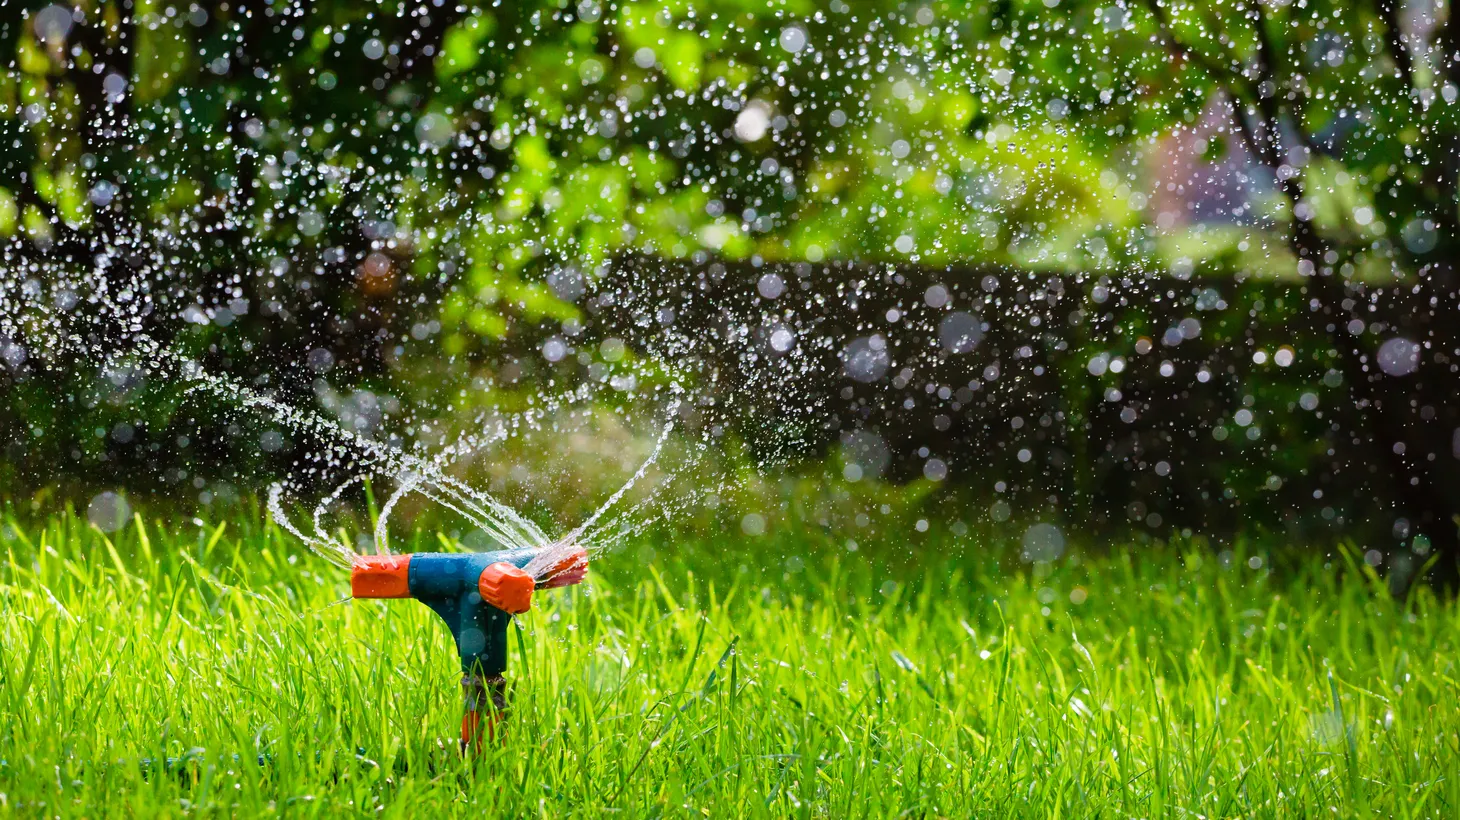 Starting in June, many Southern Californians will be limited to watering their yards only once a week. A set of new water restrictions will affect 6 million residents.